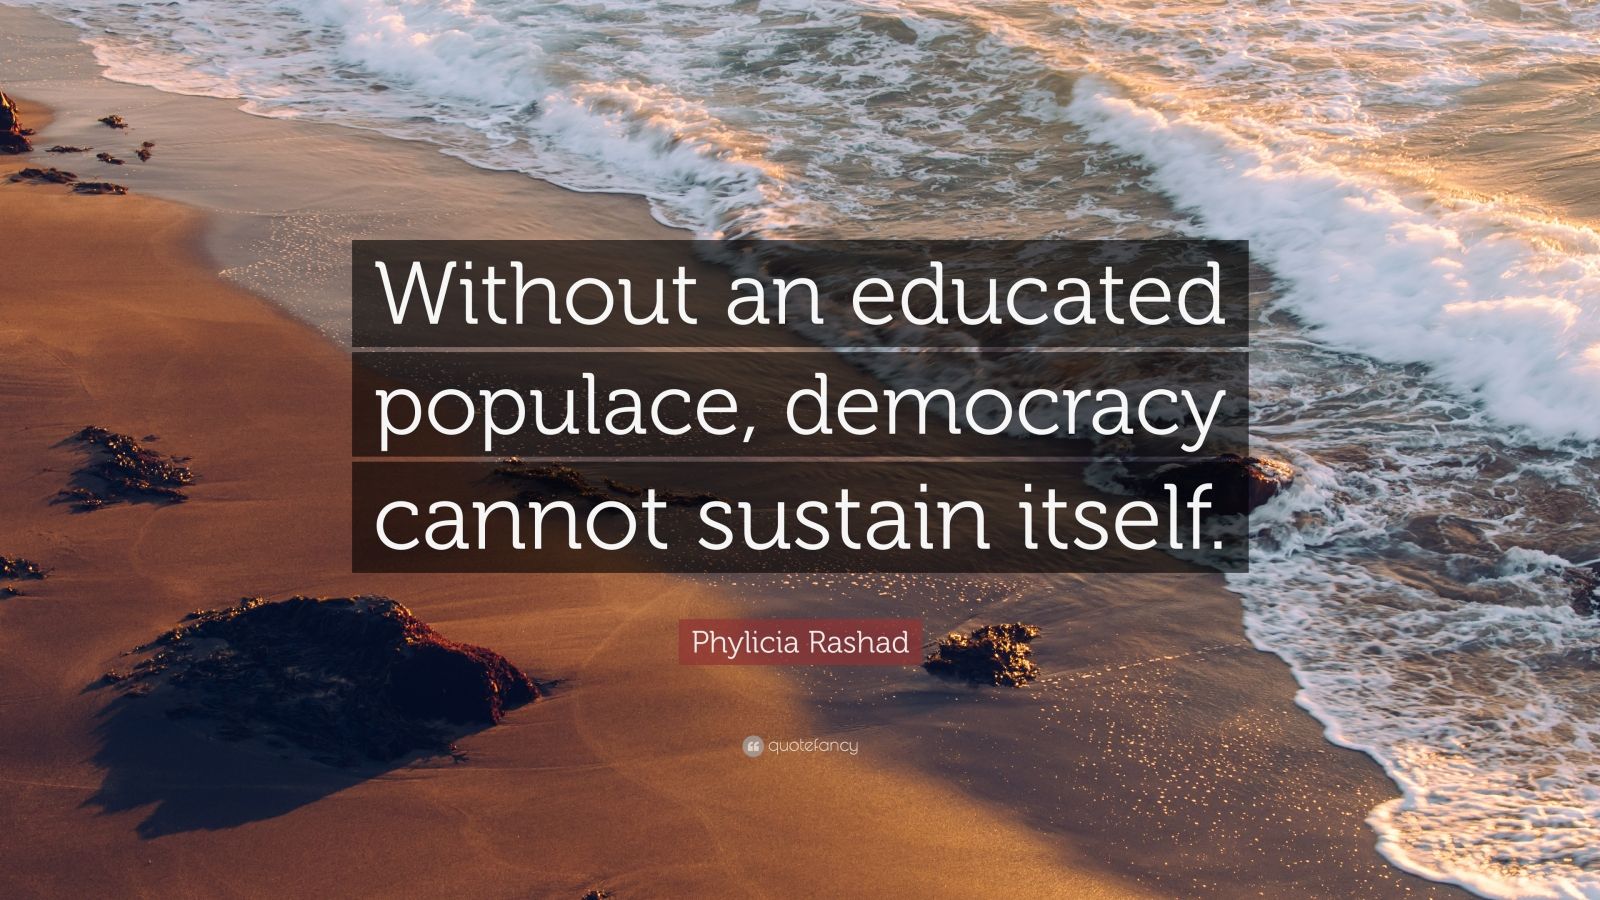 democracy cannot survive without education write an essay